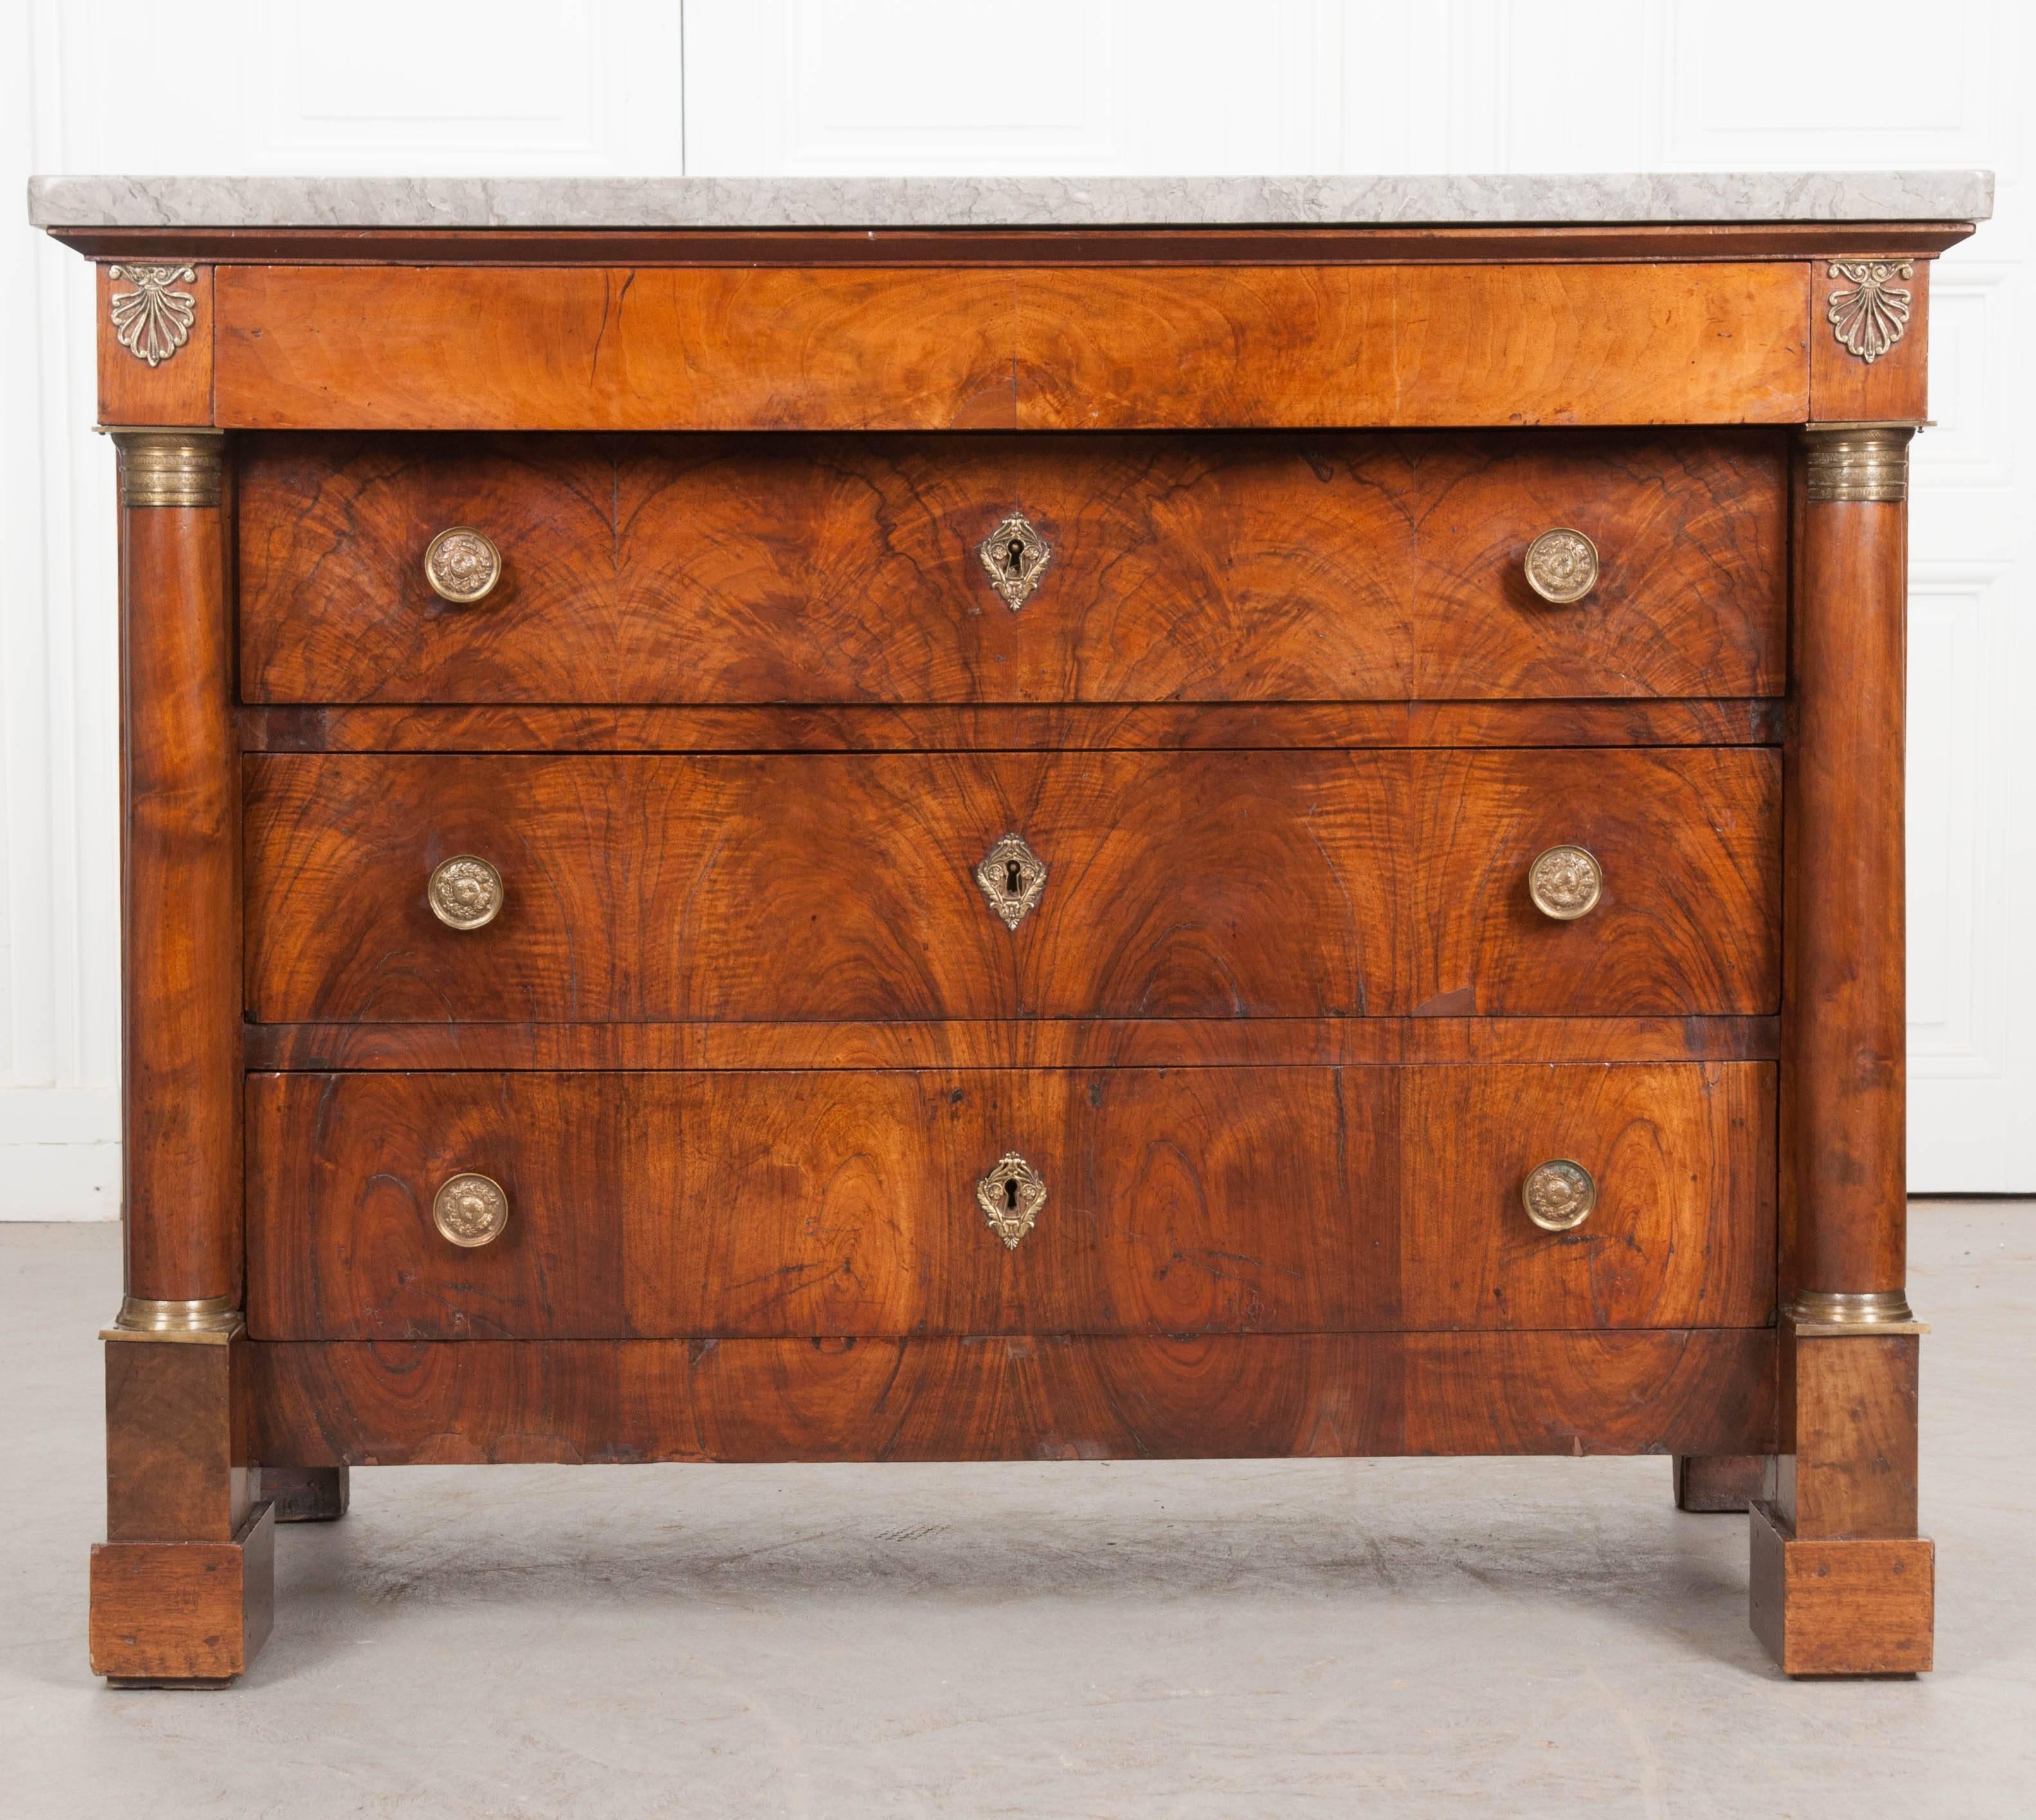 A stunning four-drawer Empire commode, made in France, circa 1860. A thick piece of gray marble rests atop the body. This marble is very well preserved and in wonderful antique condition. Just beneath the marble top is a hidden drawer, free of any